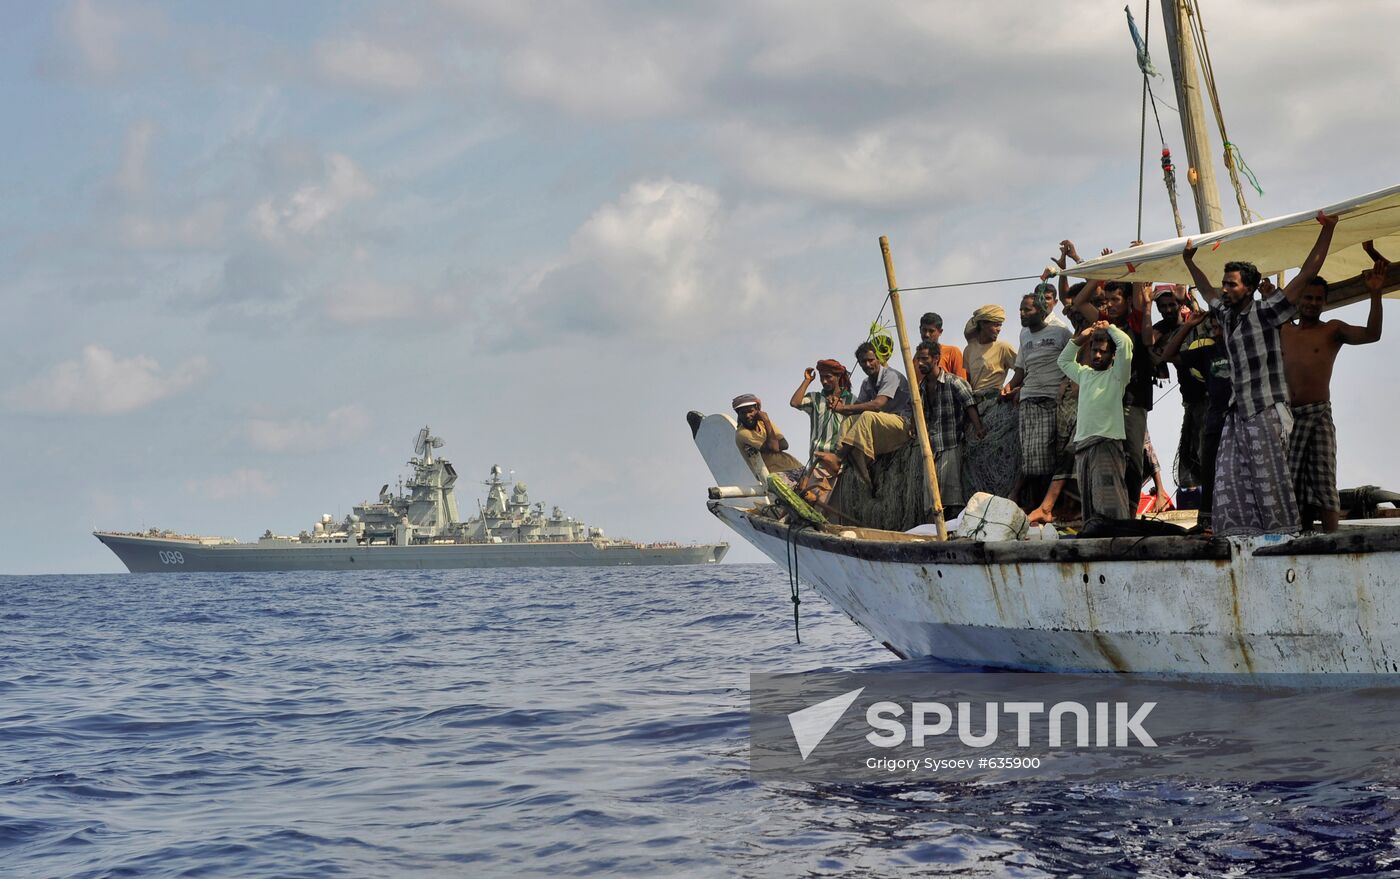 Vessel suspected of piracy spotted in Gulf of Aden